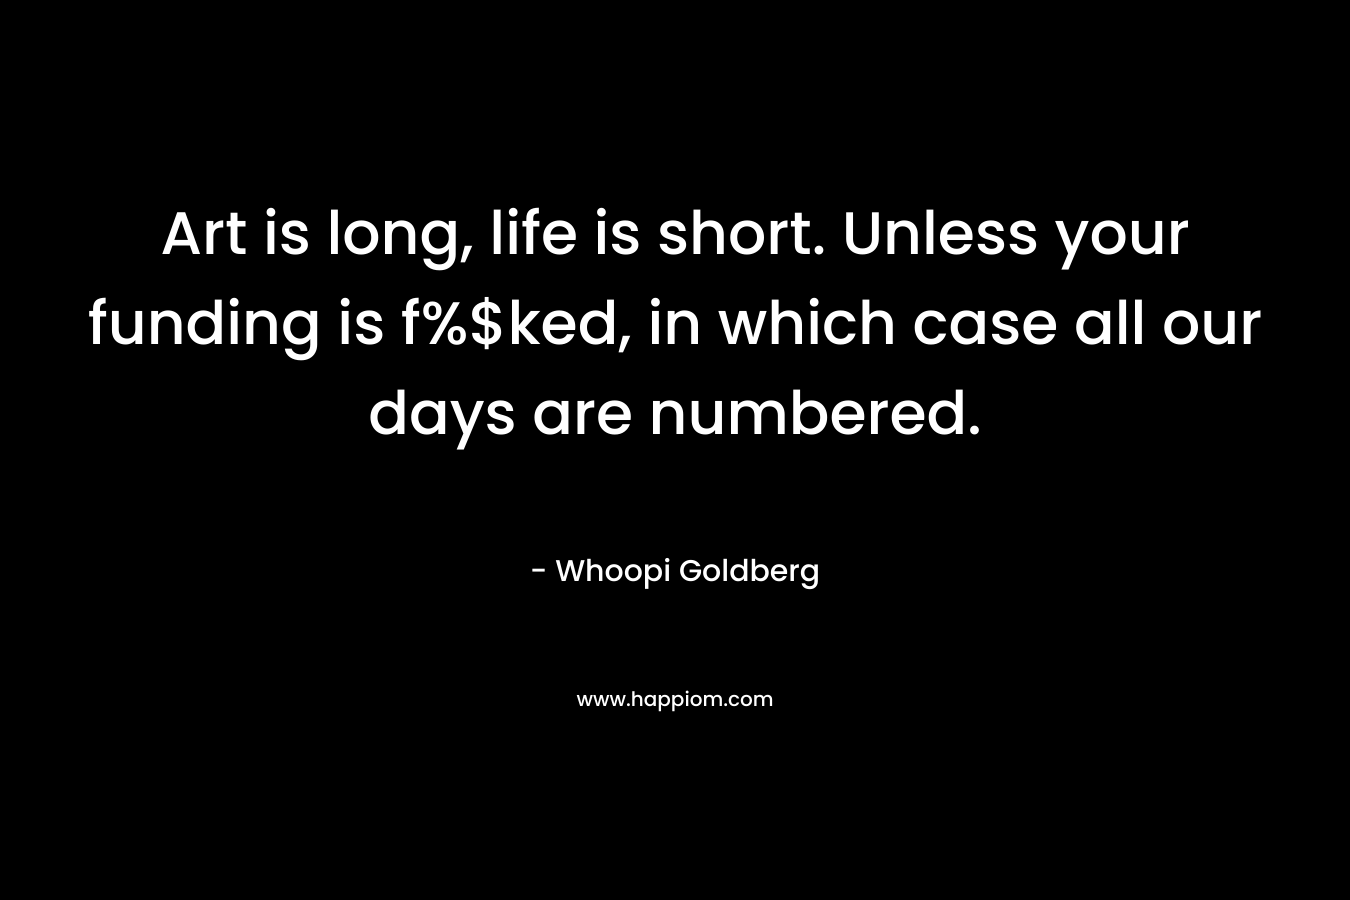 Art is long, life is short. Unless your funding is f%$ked, in which case all our days are numbered.